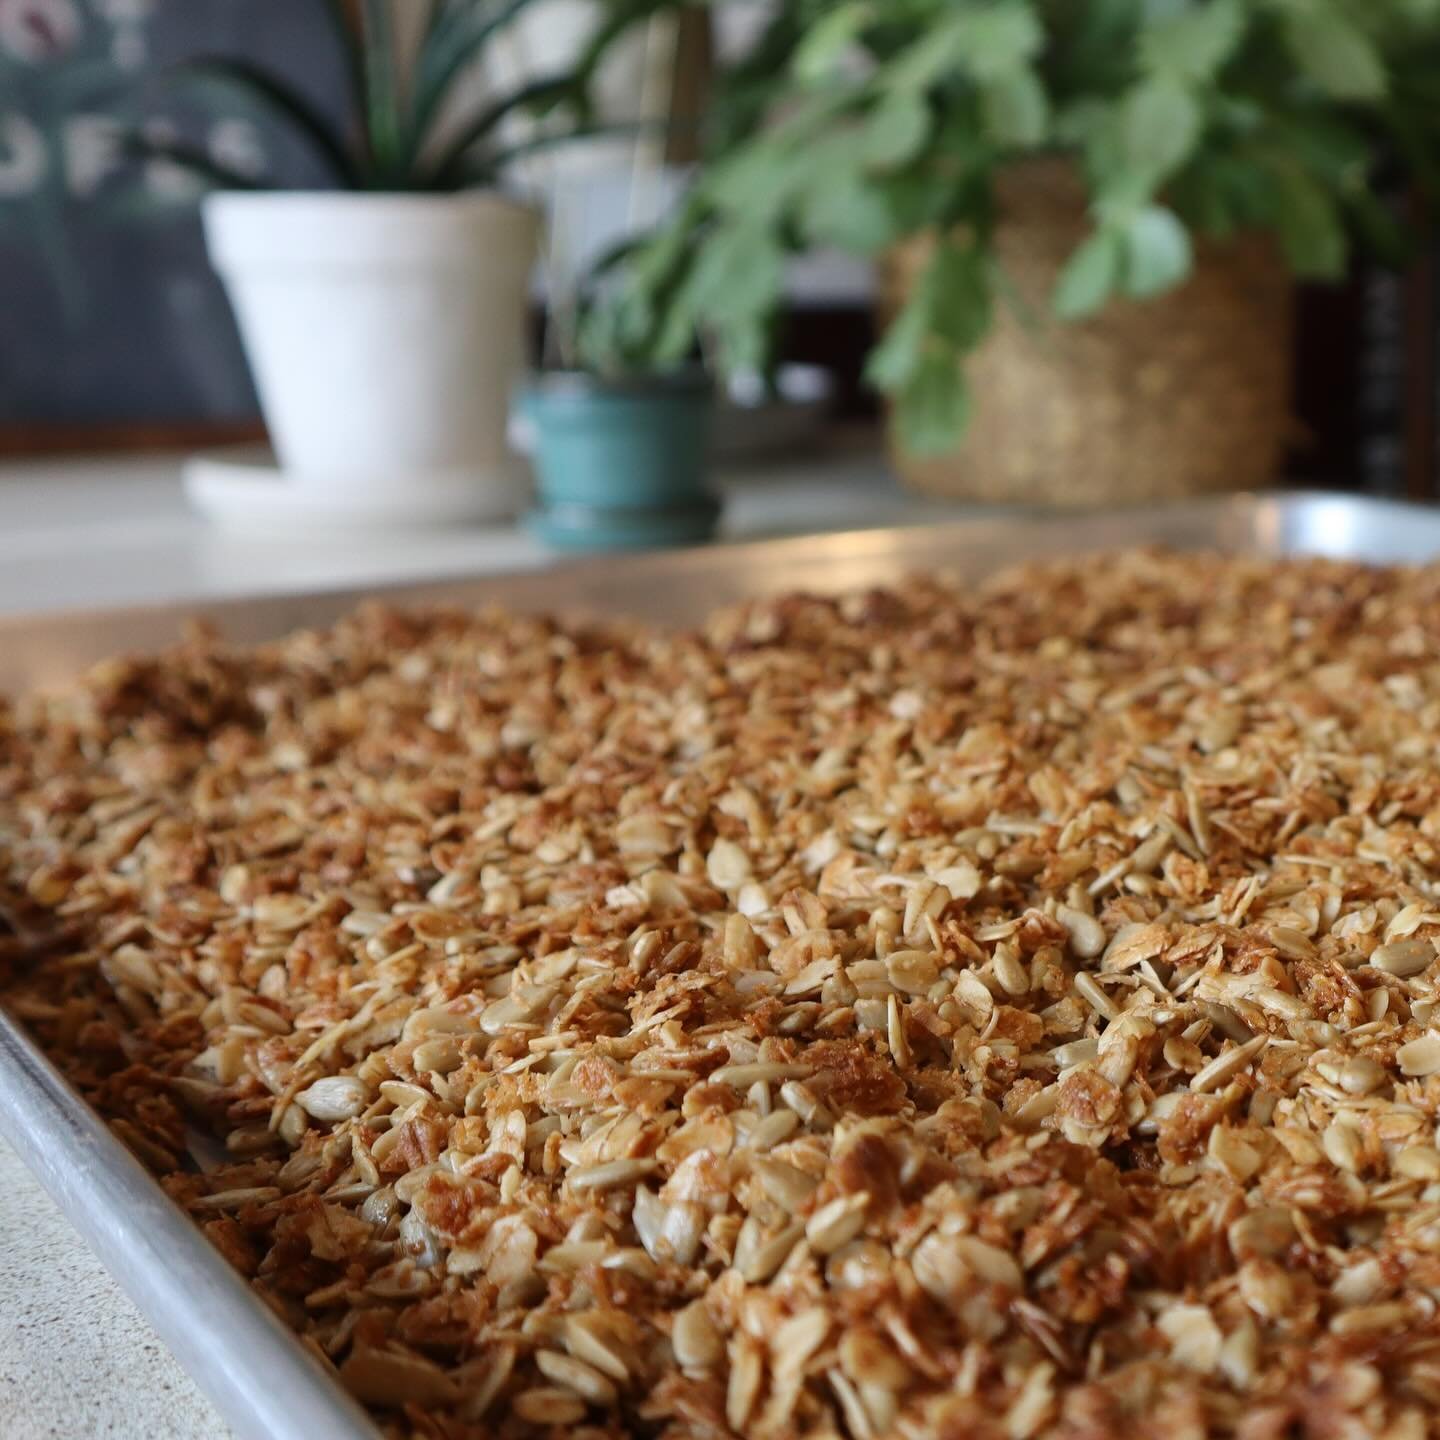 Sprinkle some goodness in your day! 🪄 We take rolled oats, local maple syrup, coconut, sunflower seeds, sea salt, and bake our granola fresh for the yogurt parfait on our menu as well as a topping on some of our muffins.